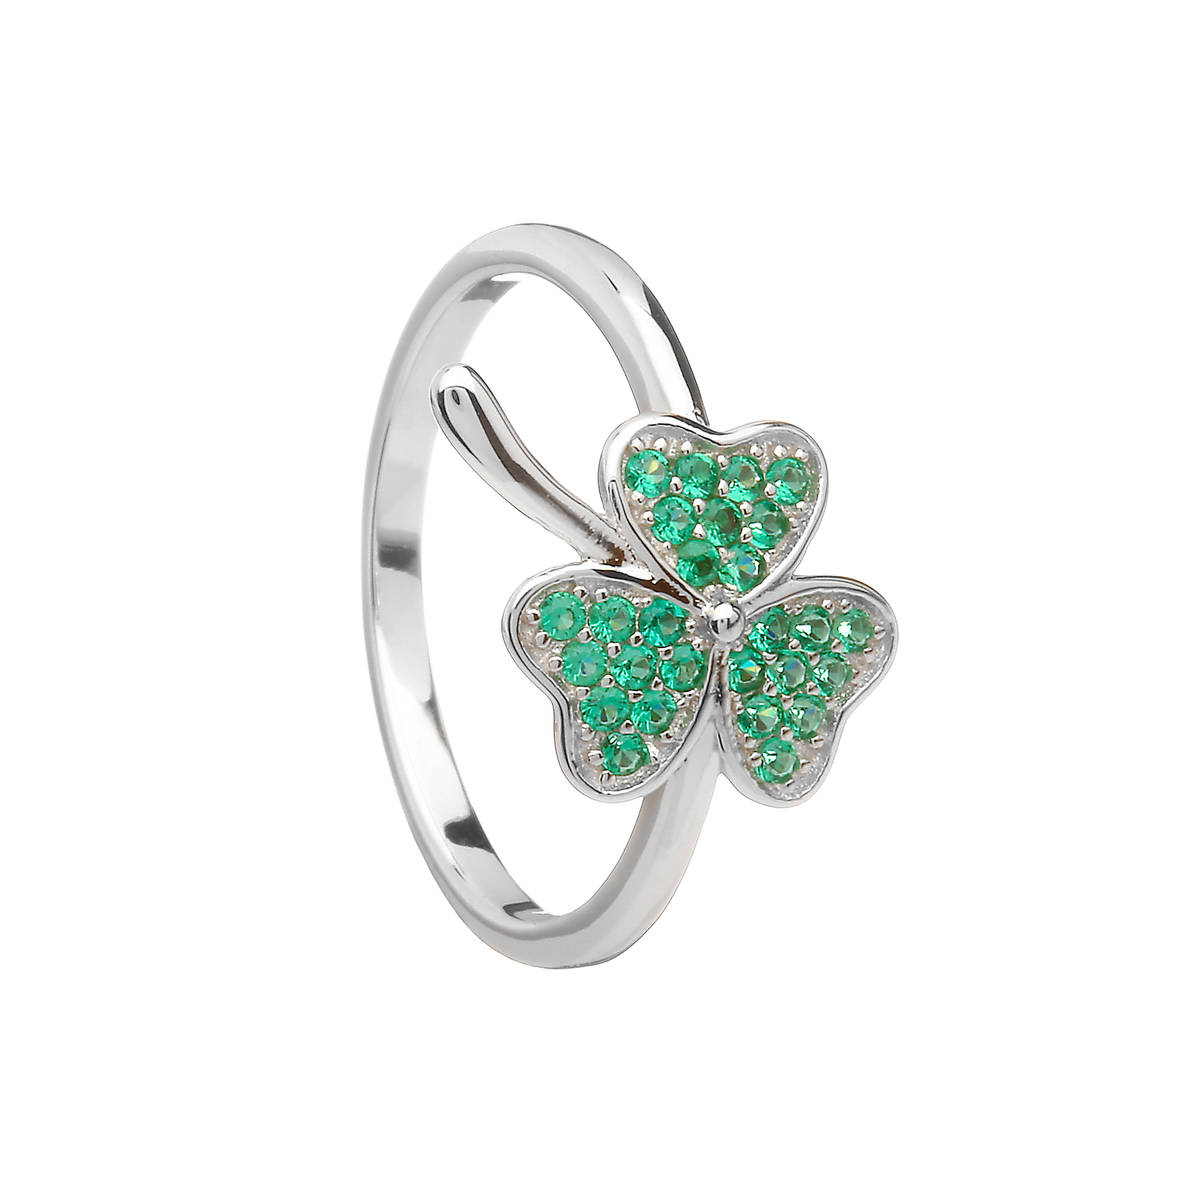 Silver Shamrock Ring With Green Cz